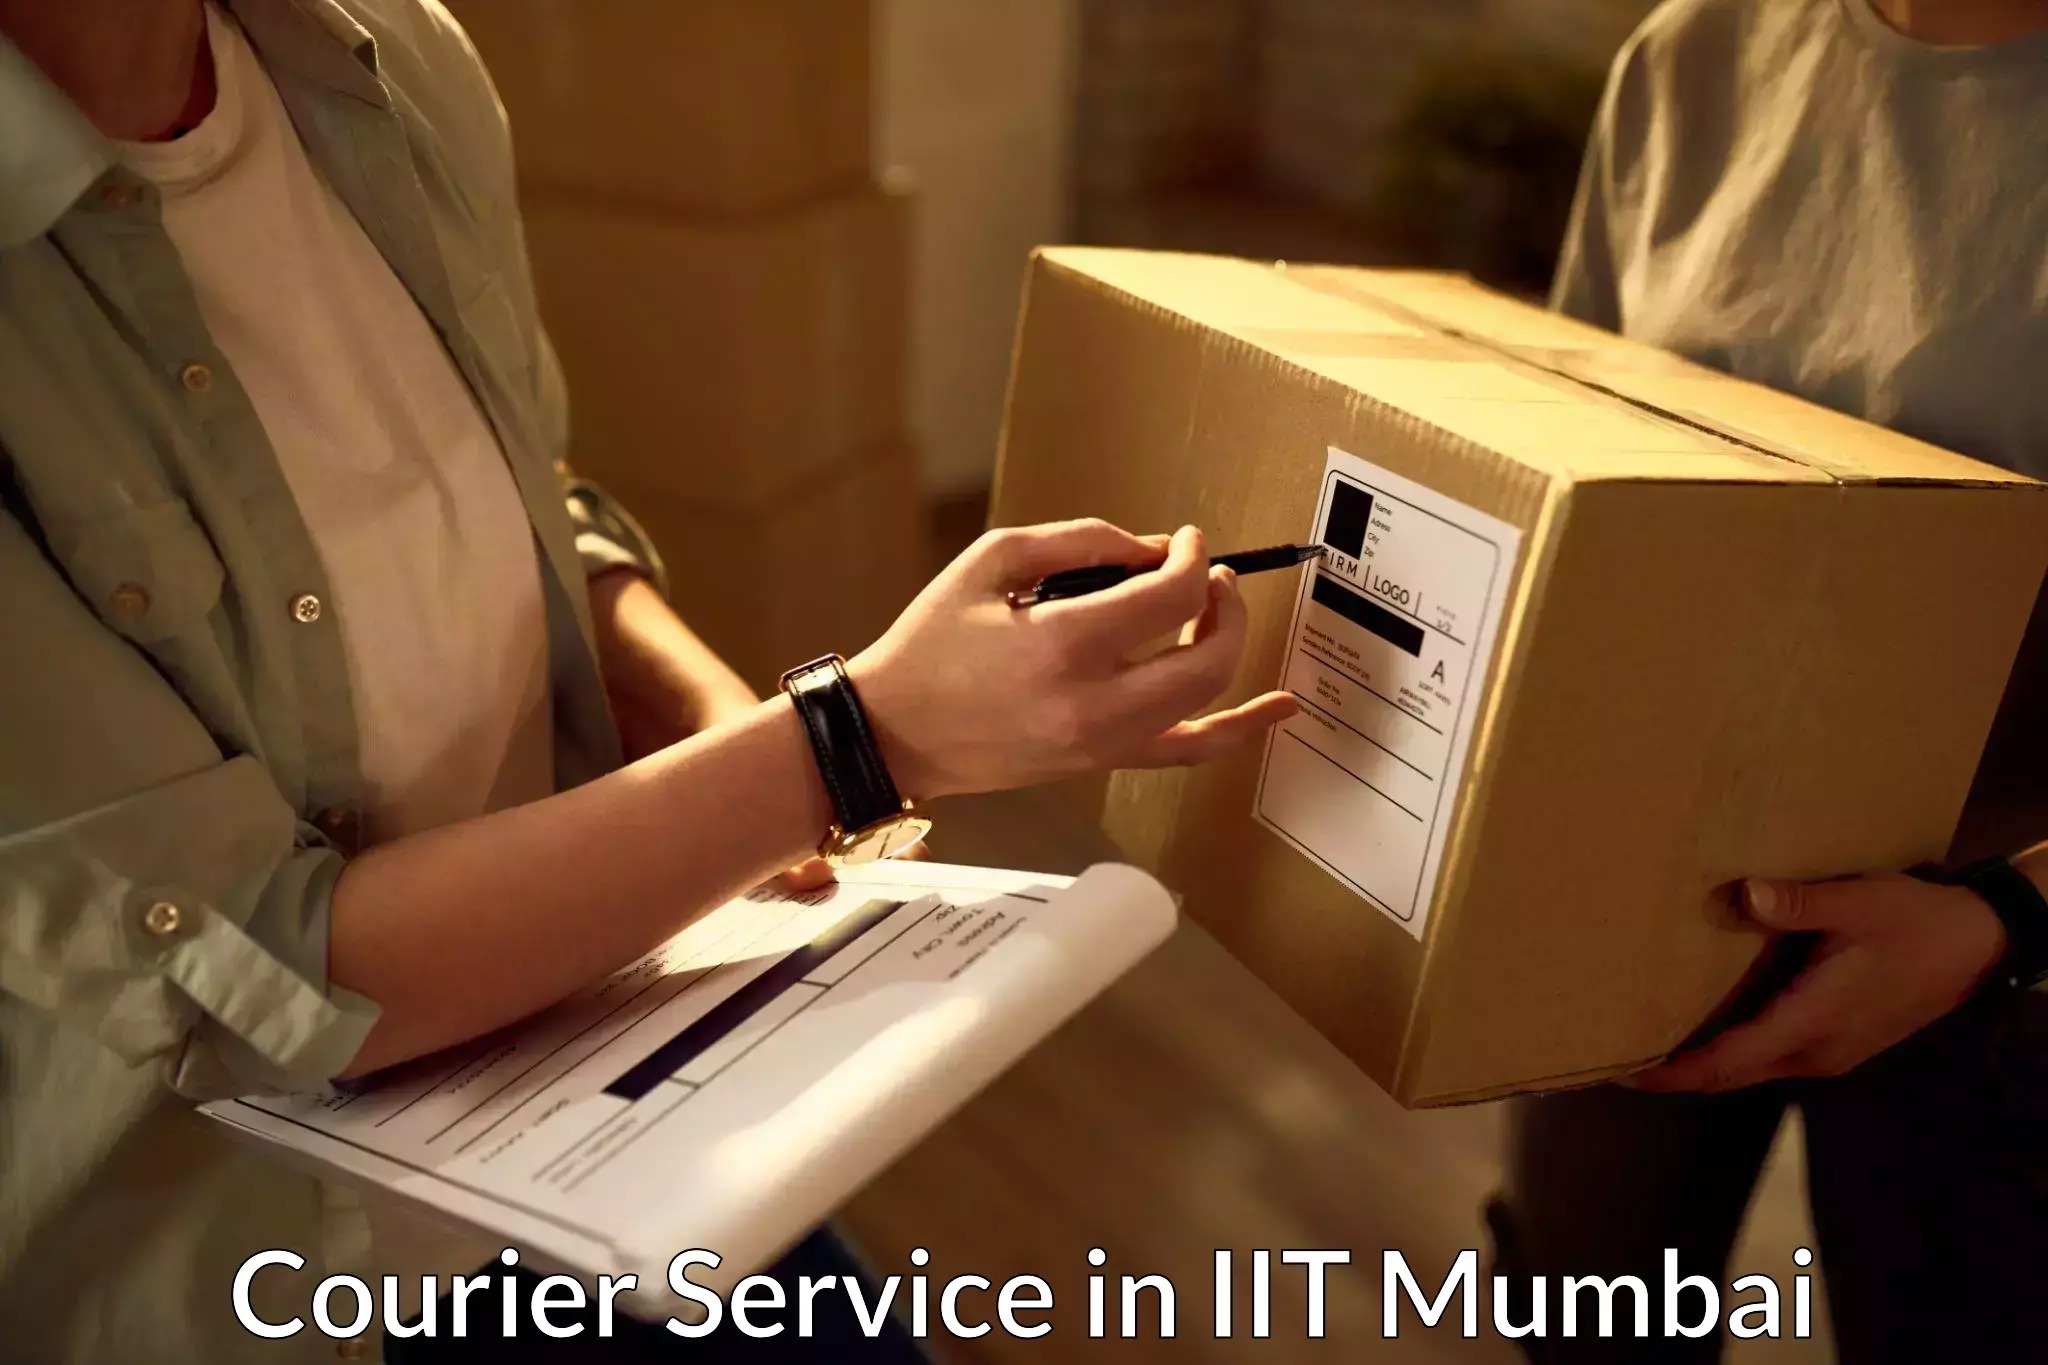 Fast delivery service in IIT Mumbai